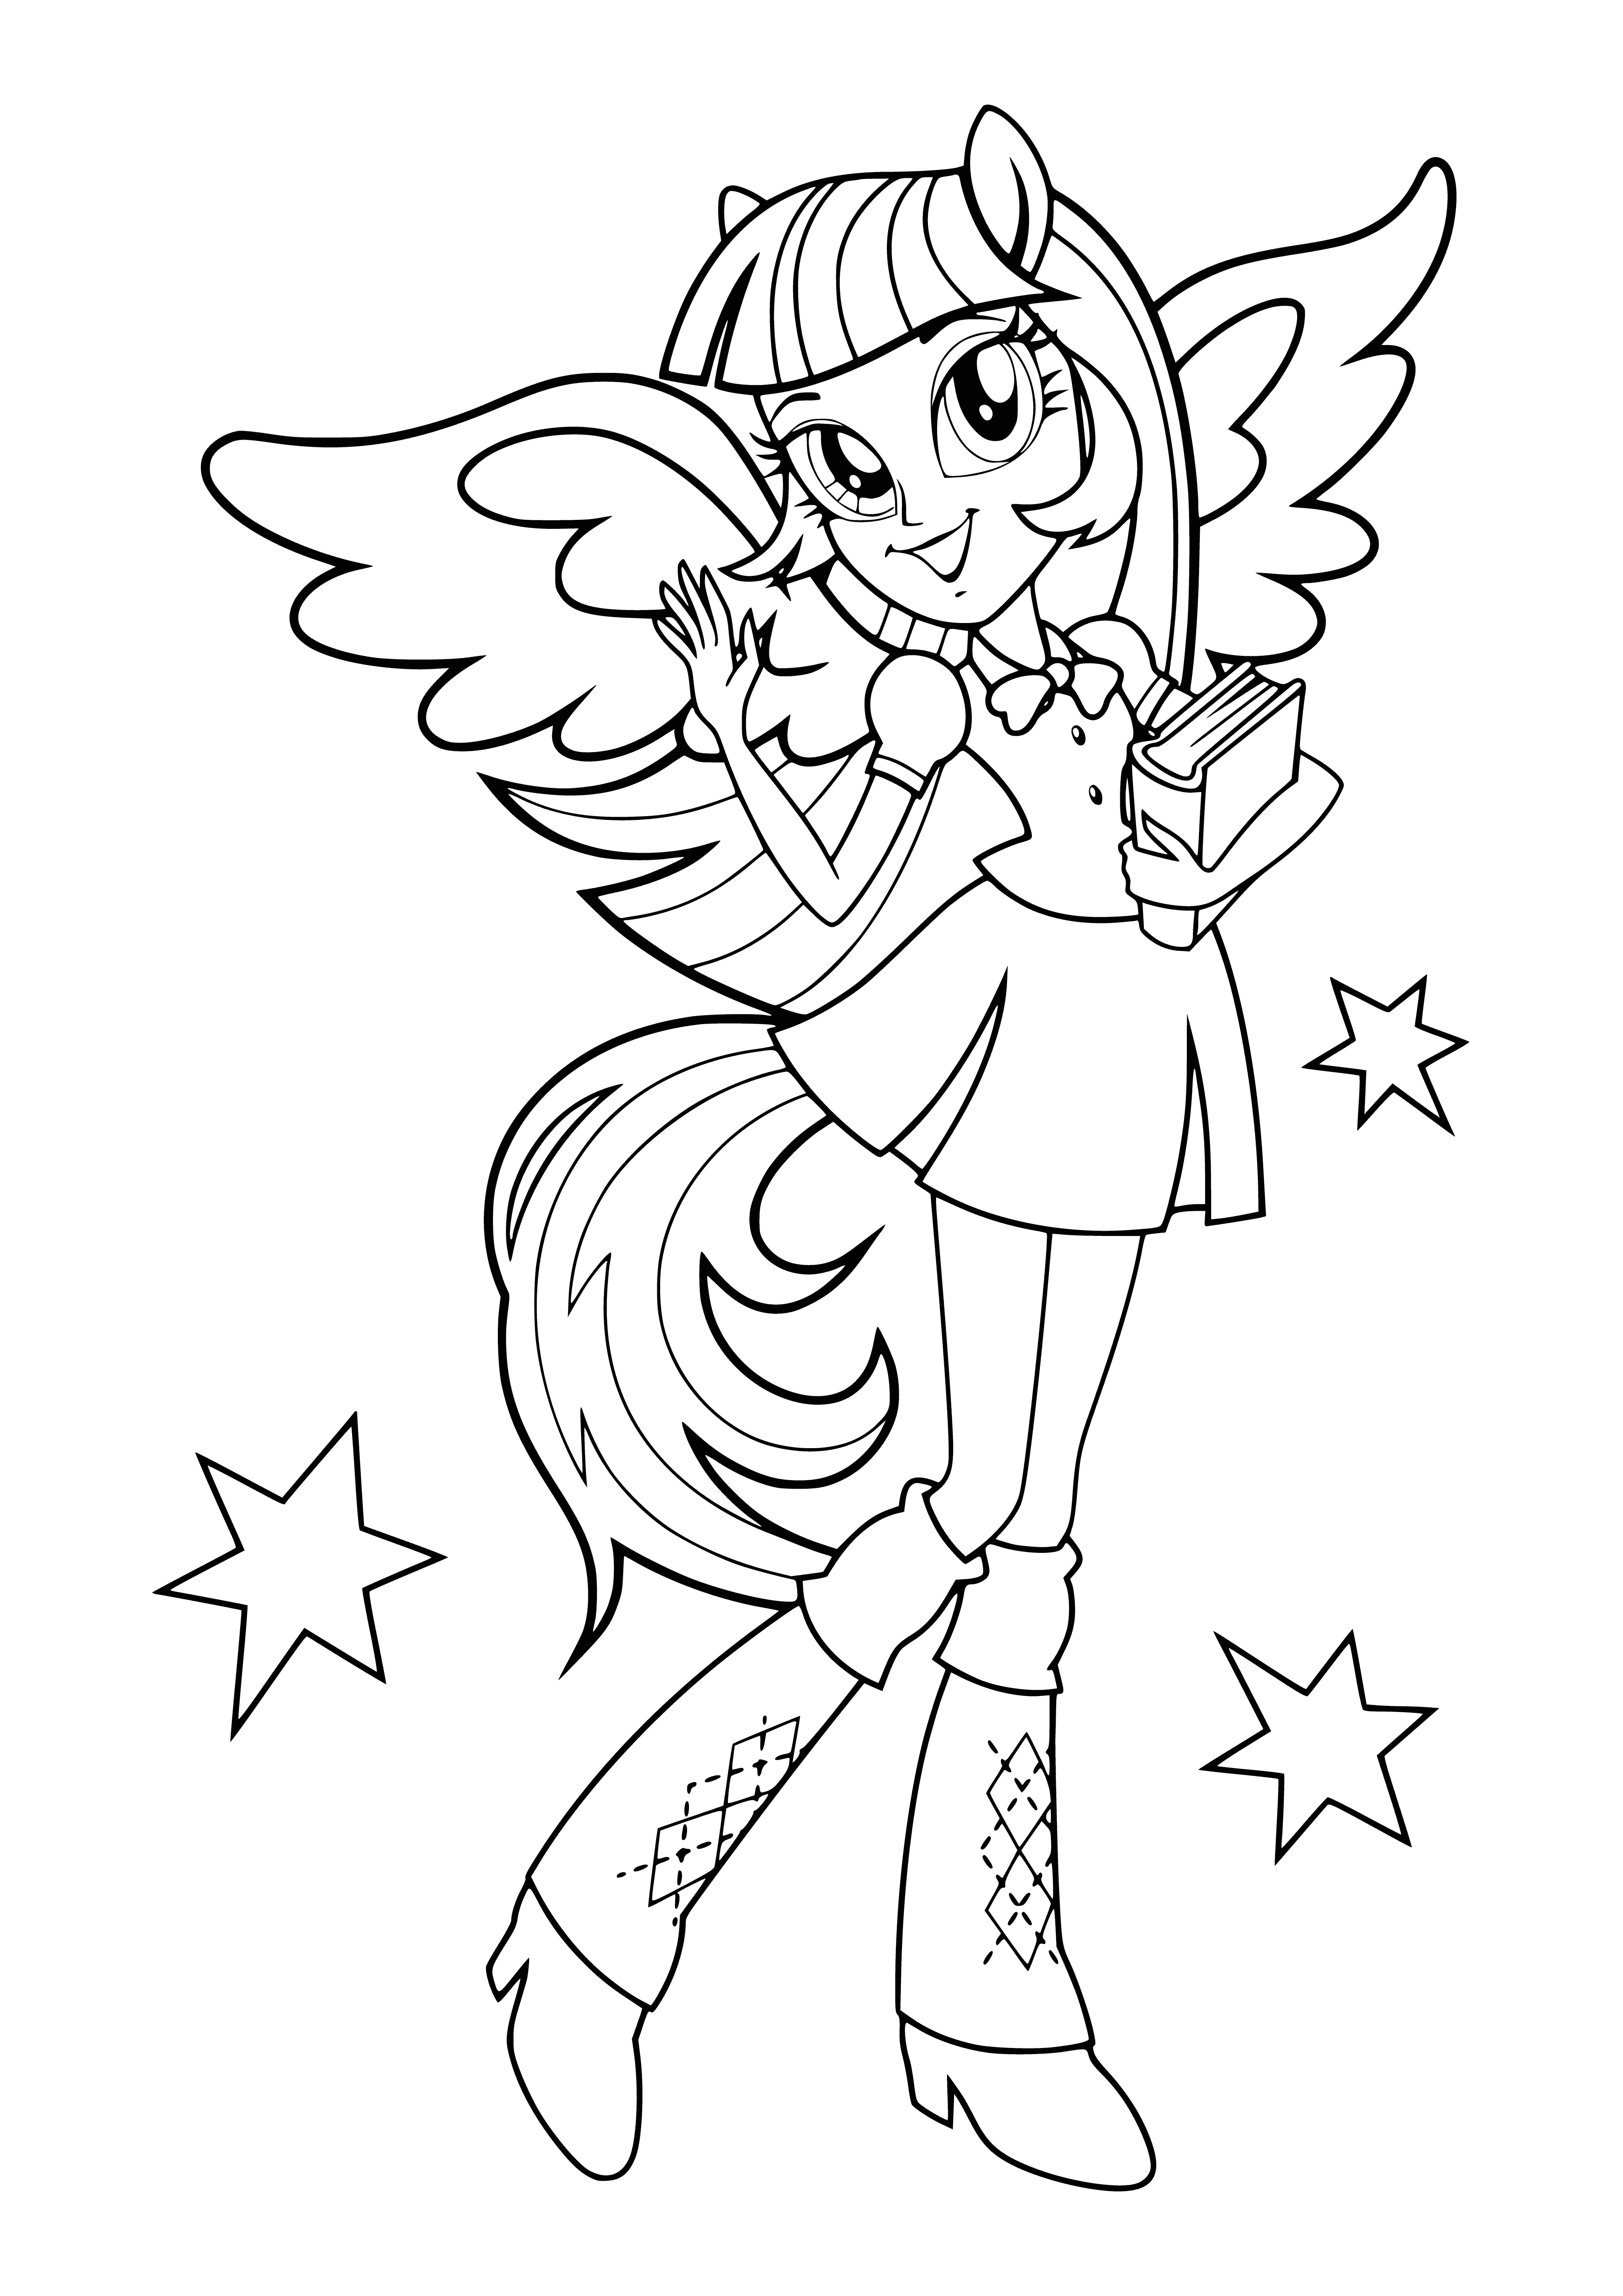 coloring page: Twilight Sparkle is a magical girl with long purple hair, a striped shirt, skirt and bracelet. #magicalgirl